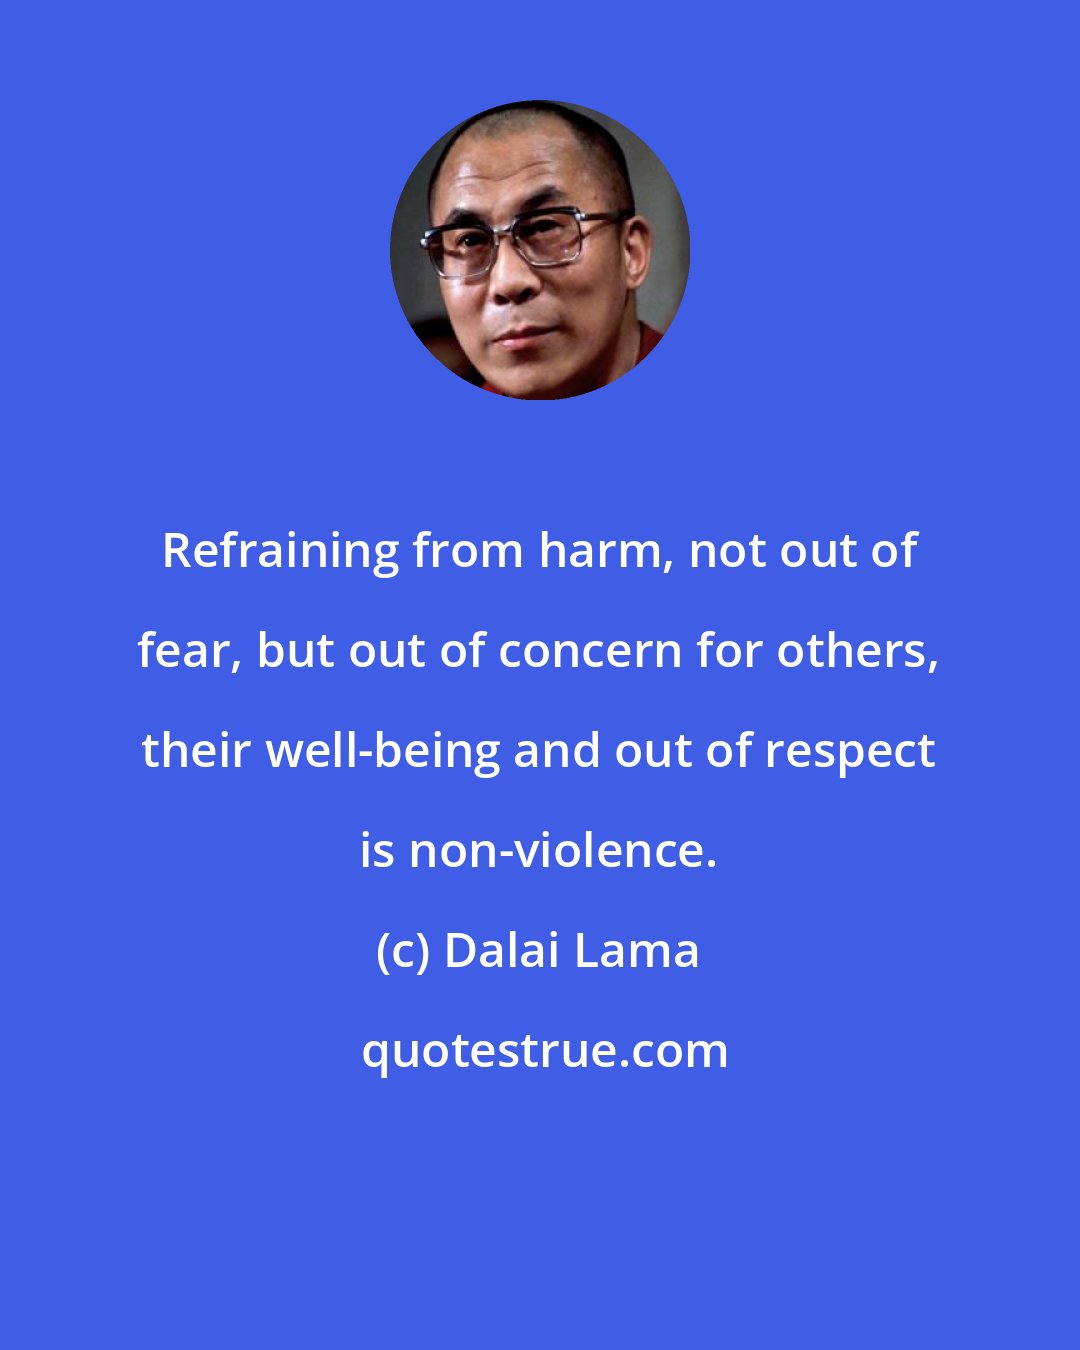 Dalai Lama: Refraining from harm, not out of fear, but out of concern for others, their well-being and out of respect is non-violence.